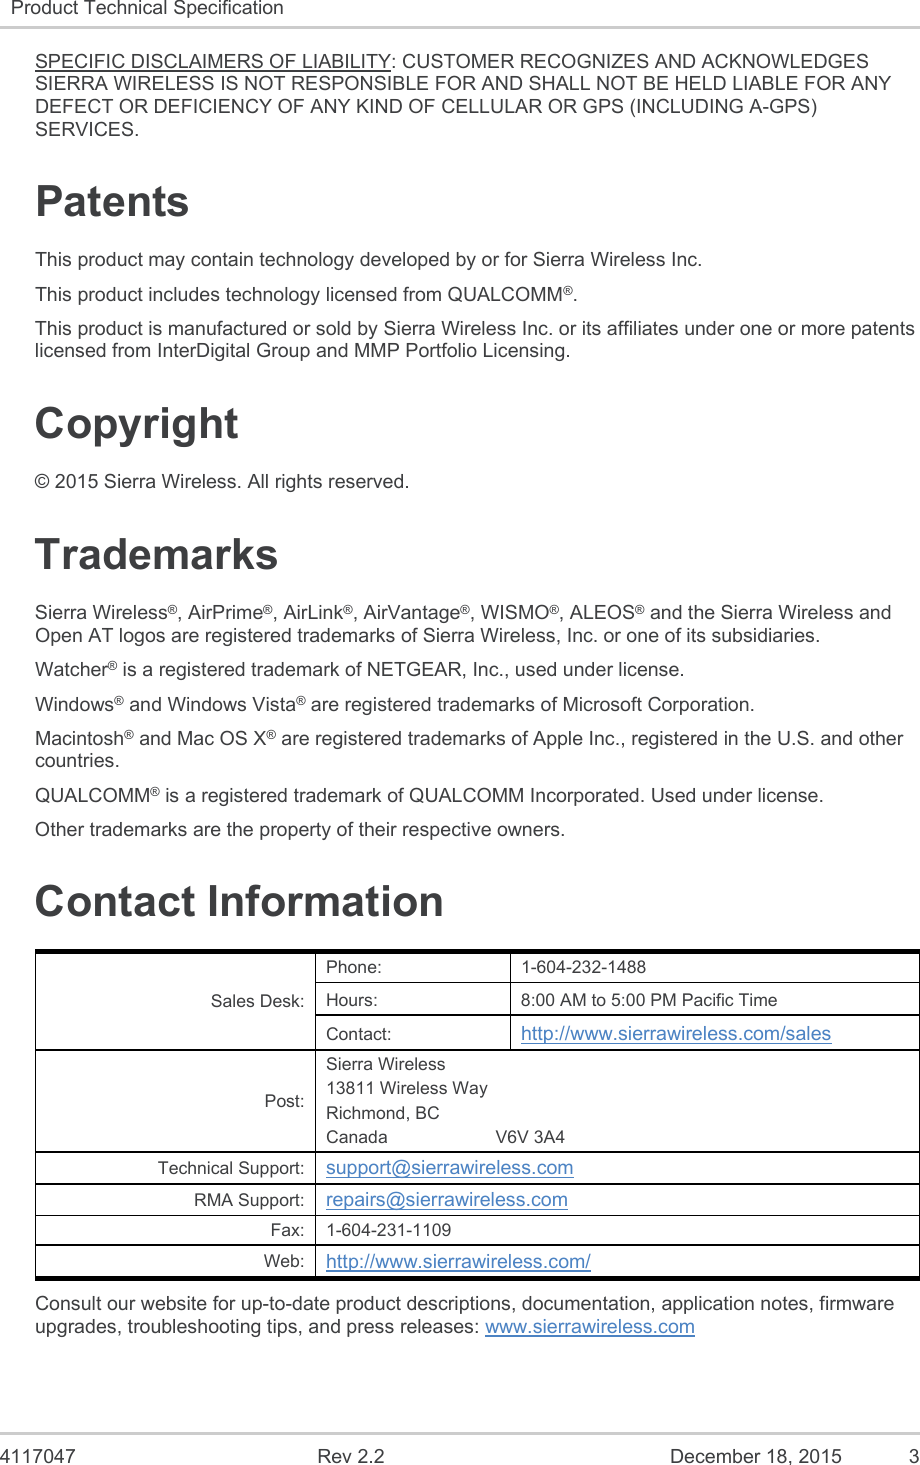  4117047  Rev 2.2  December 18, 2015  3 Product Technical Specification   SPECIFIC DISCLAIMERS OF LIABILITY: CUSTOMER RECOGNIZES AND ACKNOWLEDGES SIERRA WIRELESS IS NOT RESPONSIBLE FOR AND SHALL NOT BE HELD LIABLE FOR ANY DEFECT OR DEFICIENCY OF ANY KIND OF CELLULAR OR GPS (INCLUDING A-GPS) SERVICES. Patents This product may contain technology developed by or for Sierra Wireless Inc. This product includes technology licensed from QUALCOMM®. This product is manufactured or sold by Sierra Wireless Inc. or its affiliates under one or more patents licensed from InterDigital Group and MMP Portfolio Licensing. Copyright © 2015 Sierra Wireless. All rights reserved. Trademarks Sierra Wireless®, AirPrime®, AirLink®, AirVantage®, WISMO®, ALEOS® and the Sierra Wireless and Open AT logos are registered trademarks of Sierra Wireless, Inc. or one of its subsidiaries. Watcher® is a registered trademark of NETGEAR, Inc., used under license. Windows® and Windows Vista® are registered trademarks of Microsoft Corporation. Macintosh® and Mac OS X® are registered trademarks of Apple Inc., registered in the U.S. and other countries. QUALCOMM® is a registered trademark of QUALCOMM Incorporated. Used under license. Other trademarks are the property of their respective owners. Contact Information Sales Desk: Phone:  1-604-232-1488 Hours:  8:00 AM to 5:00 PM Pacific Time Contact:  http://www.sierrawireless.com/sales Post: Sierra Wireless 13811 Wireless Way Richmond, BC Canada                      V6V 3A4 Technical Support:  support@sierrawireless.com RMA Support:  repairs@sierrawireless.com Fax:  1-604-231-1109 Web:  http://www.sierrawireless.com/ Consult our website for up-to-date product descriptions, documentation, application notes, firmware upgrades, troubleshooting tips, and press releases: www.sierrawireless.com 